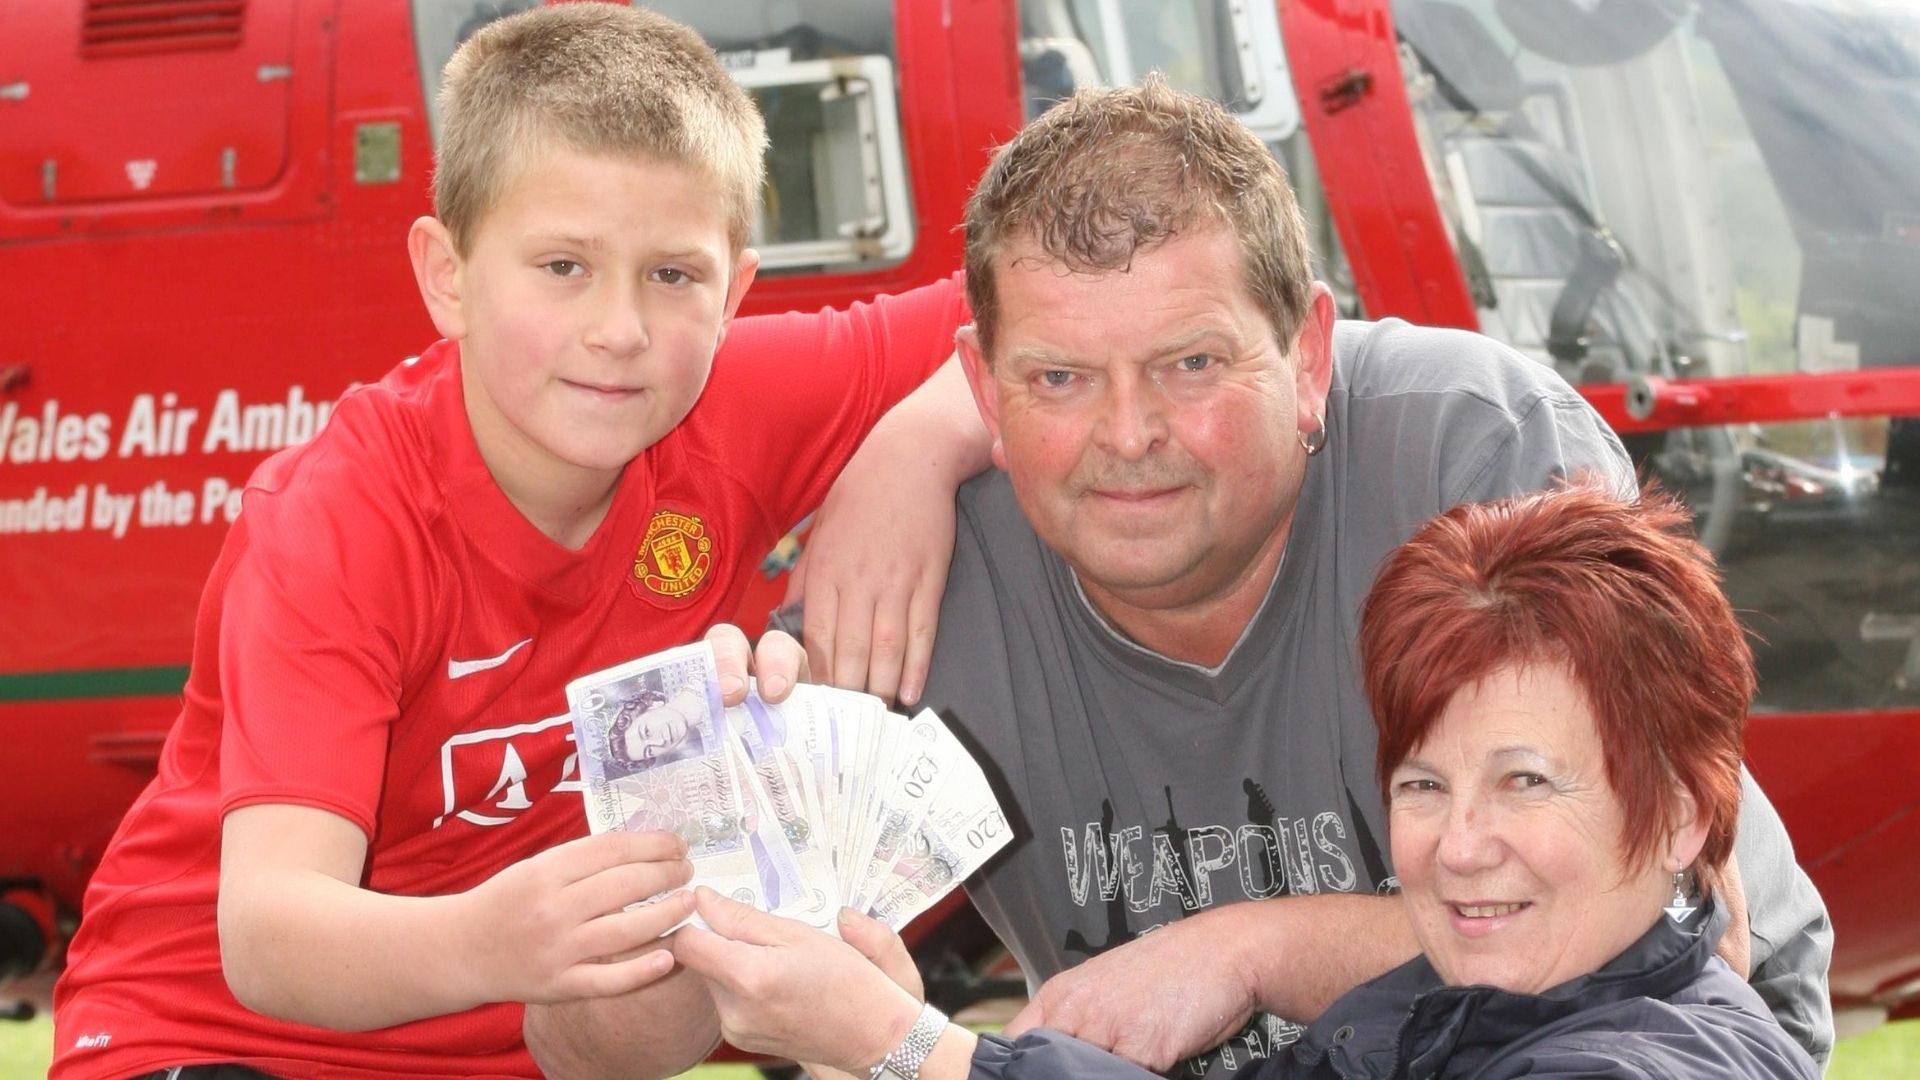 Nick Breese from Caersws has raised £765 for the Wales Air Ambulance from his 50th Birthday (donations instead of presents) Nick would like to thank family, friends and customers that donatedpis l-r Casey Breese (10) Nick Breese and Ann Lewis